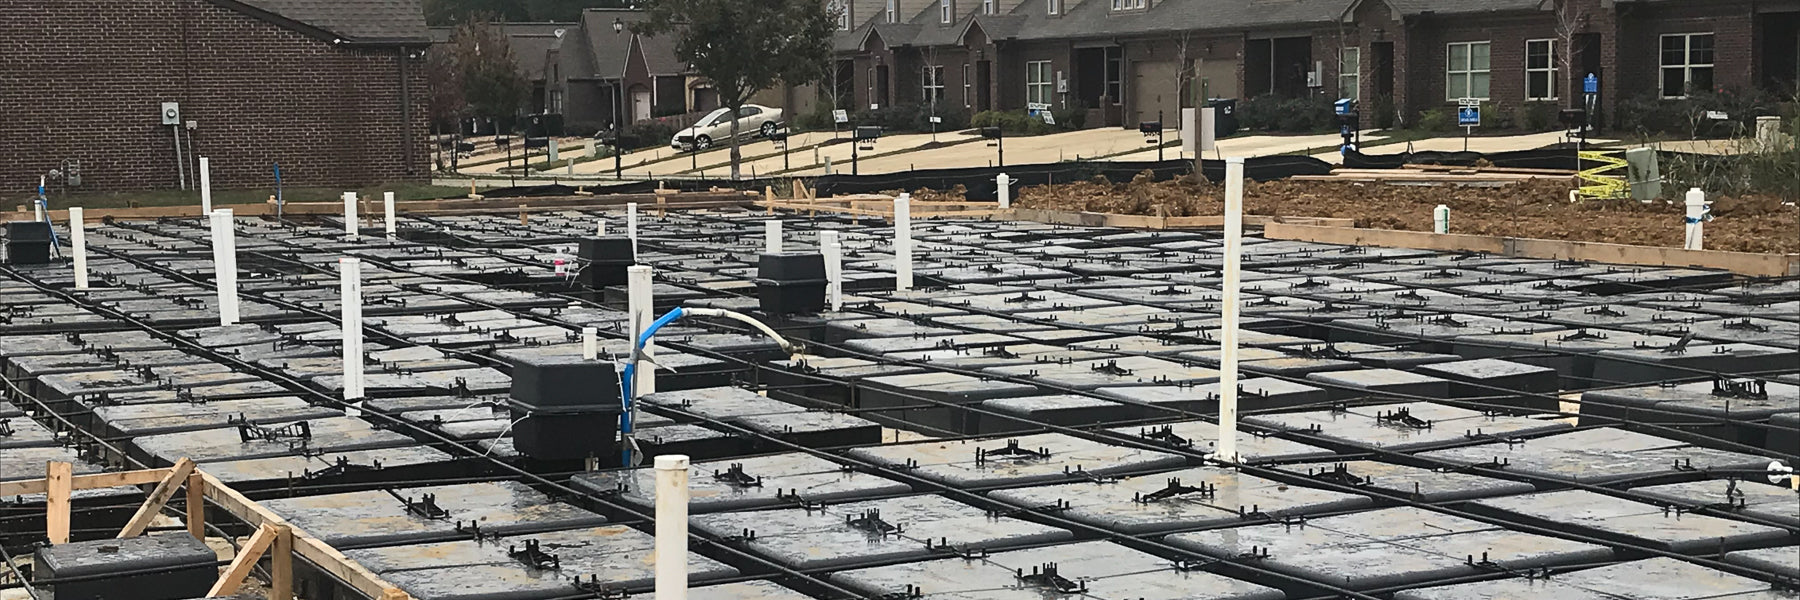 The Waffle Slab Foundation soultion by Wafflemat is the only residential foundation system for multi family home builders. It can be built in any weather conditions with no delays!